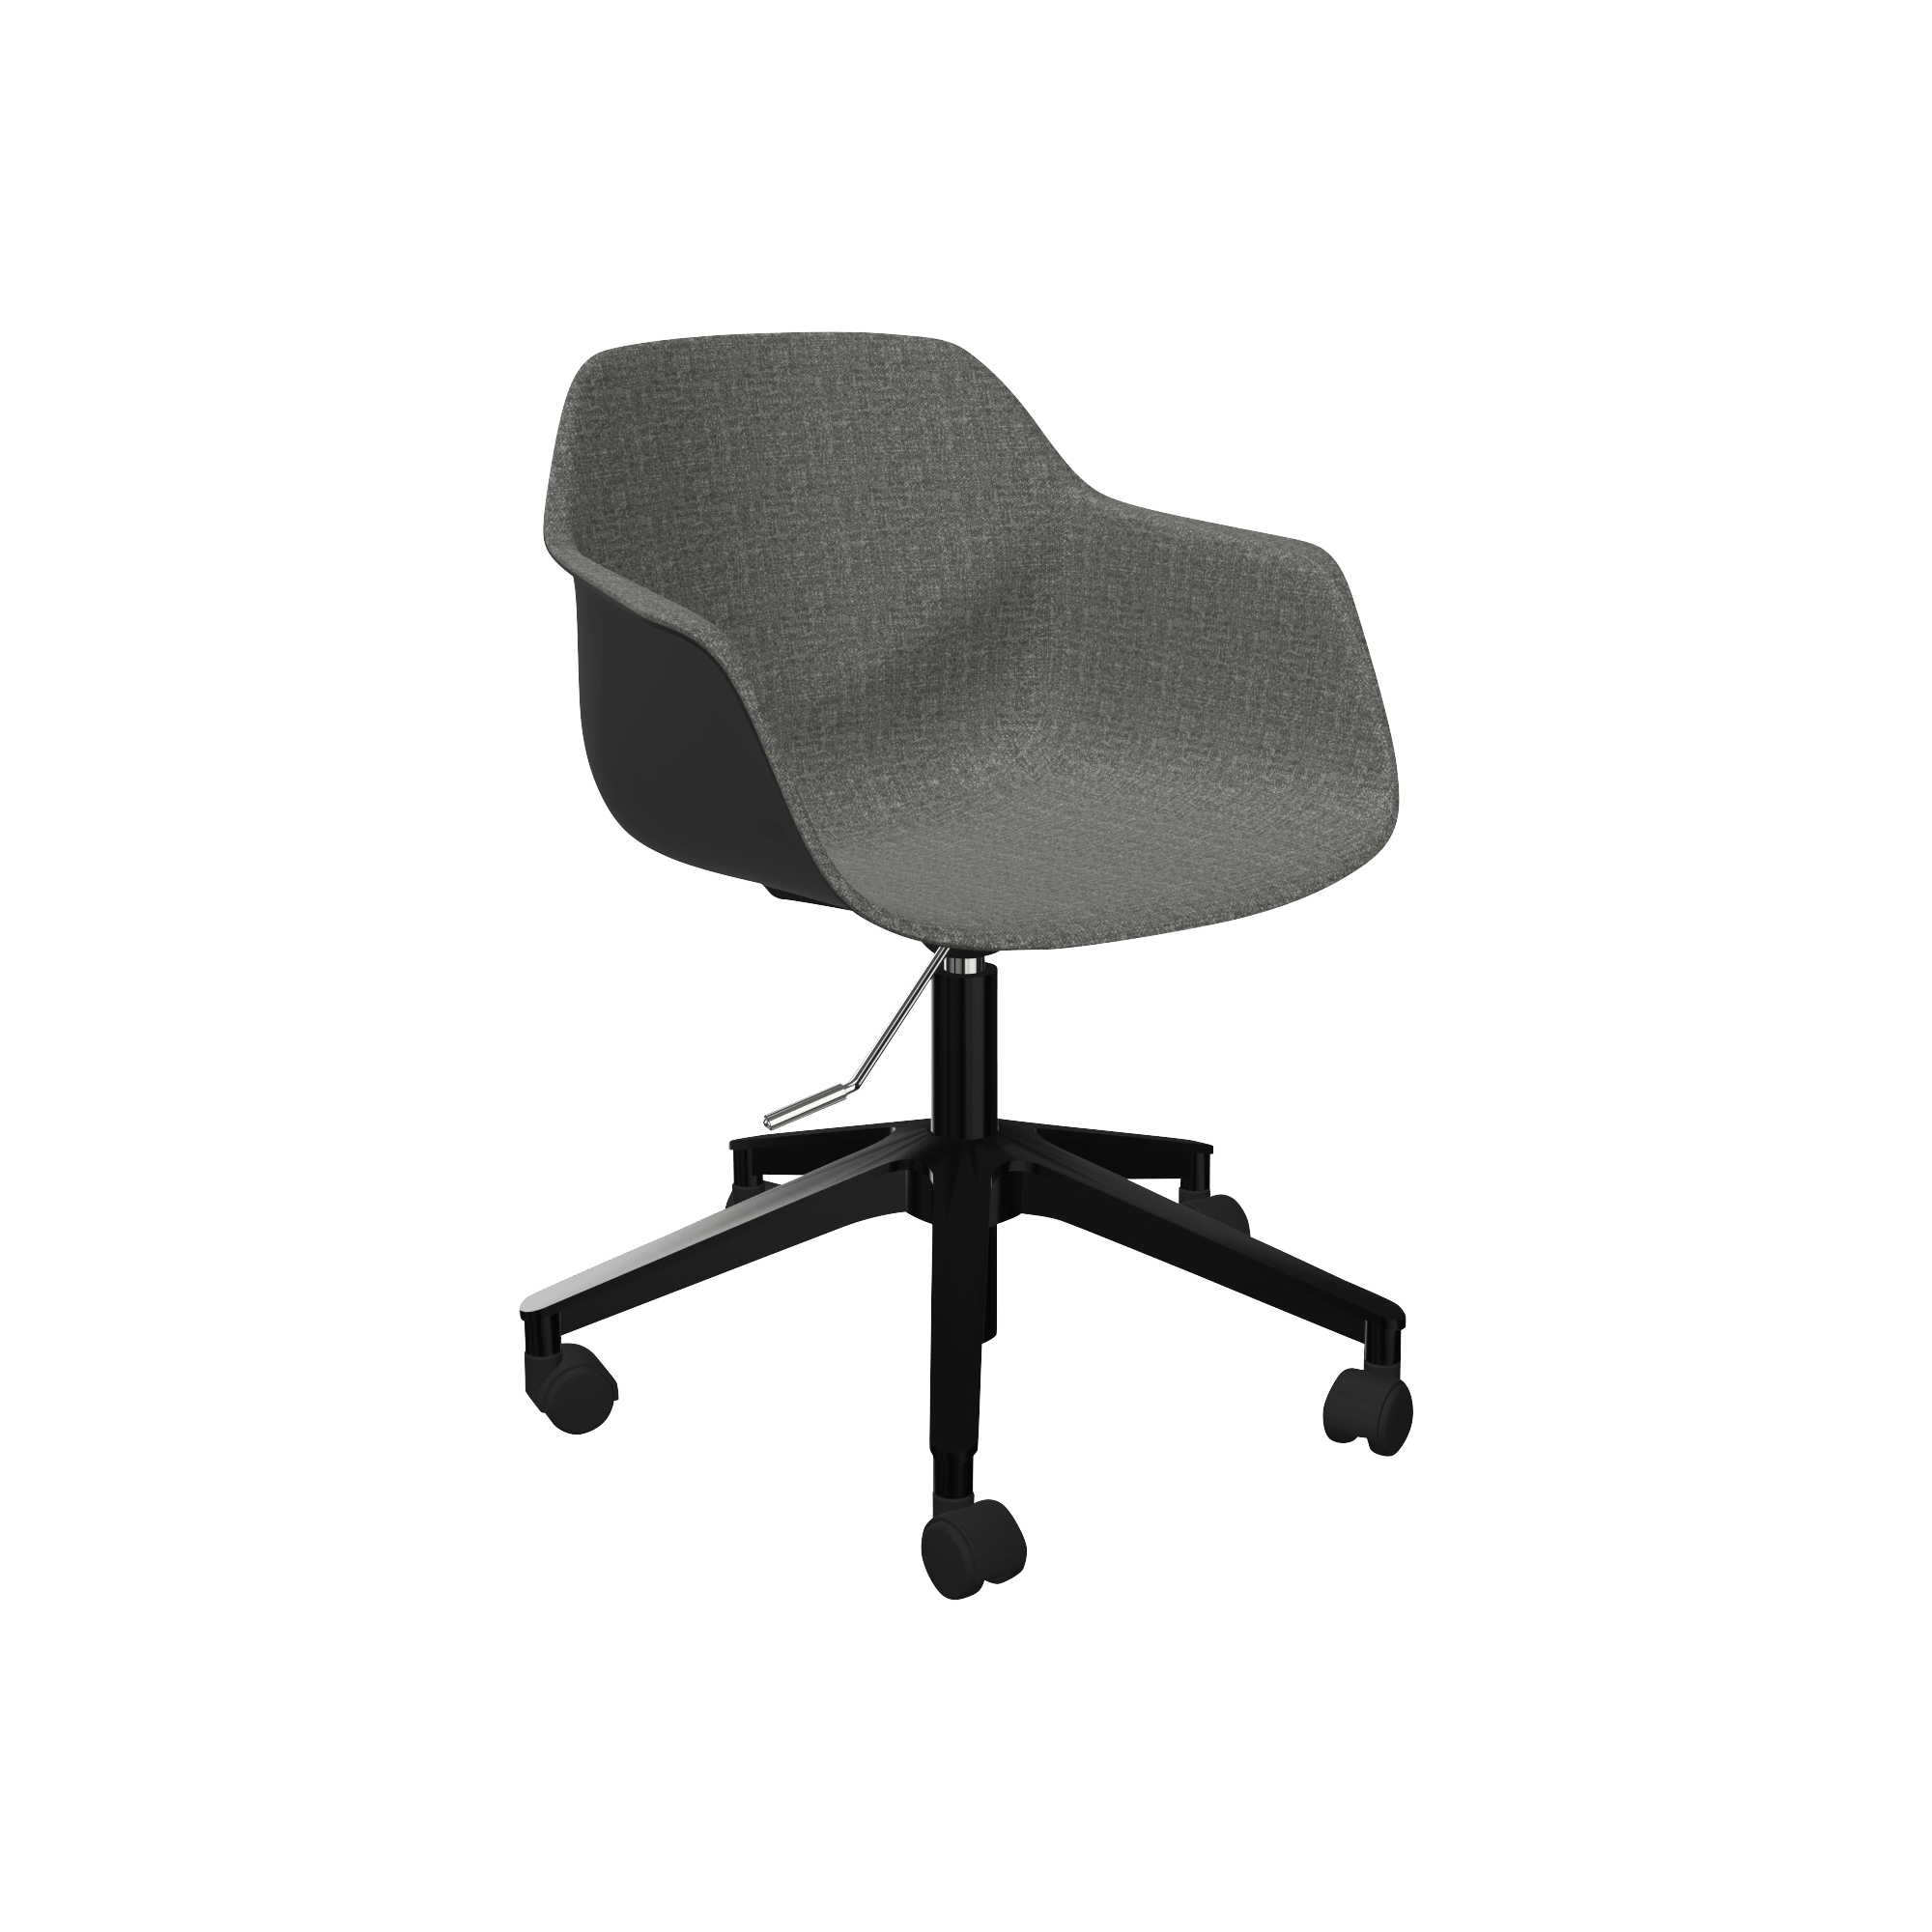 A grey office chair on casters.